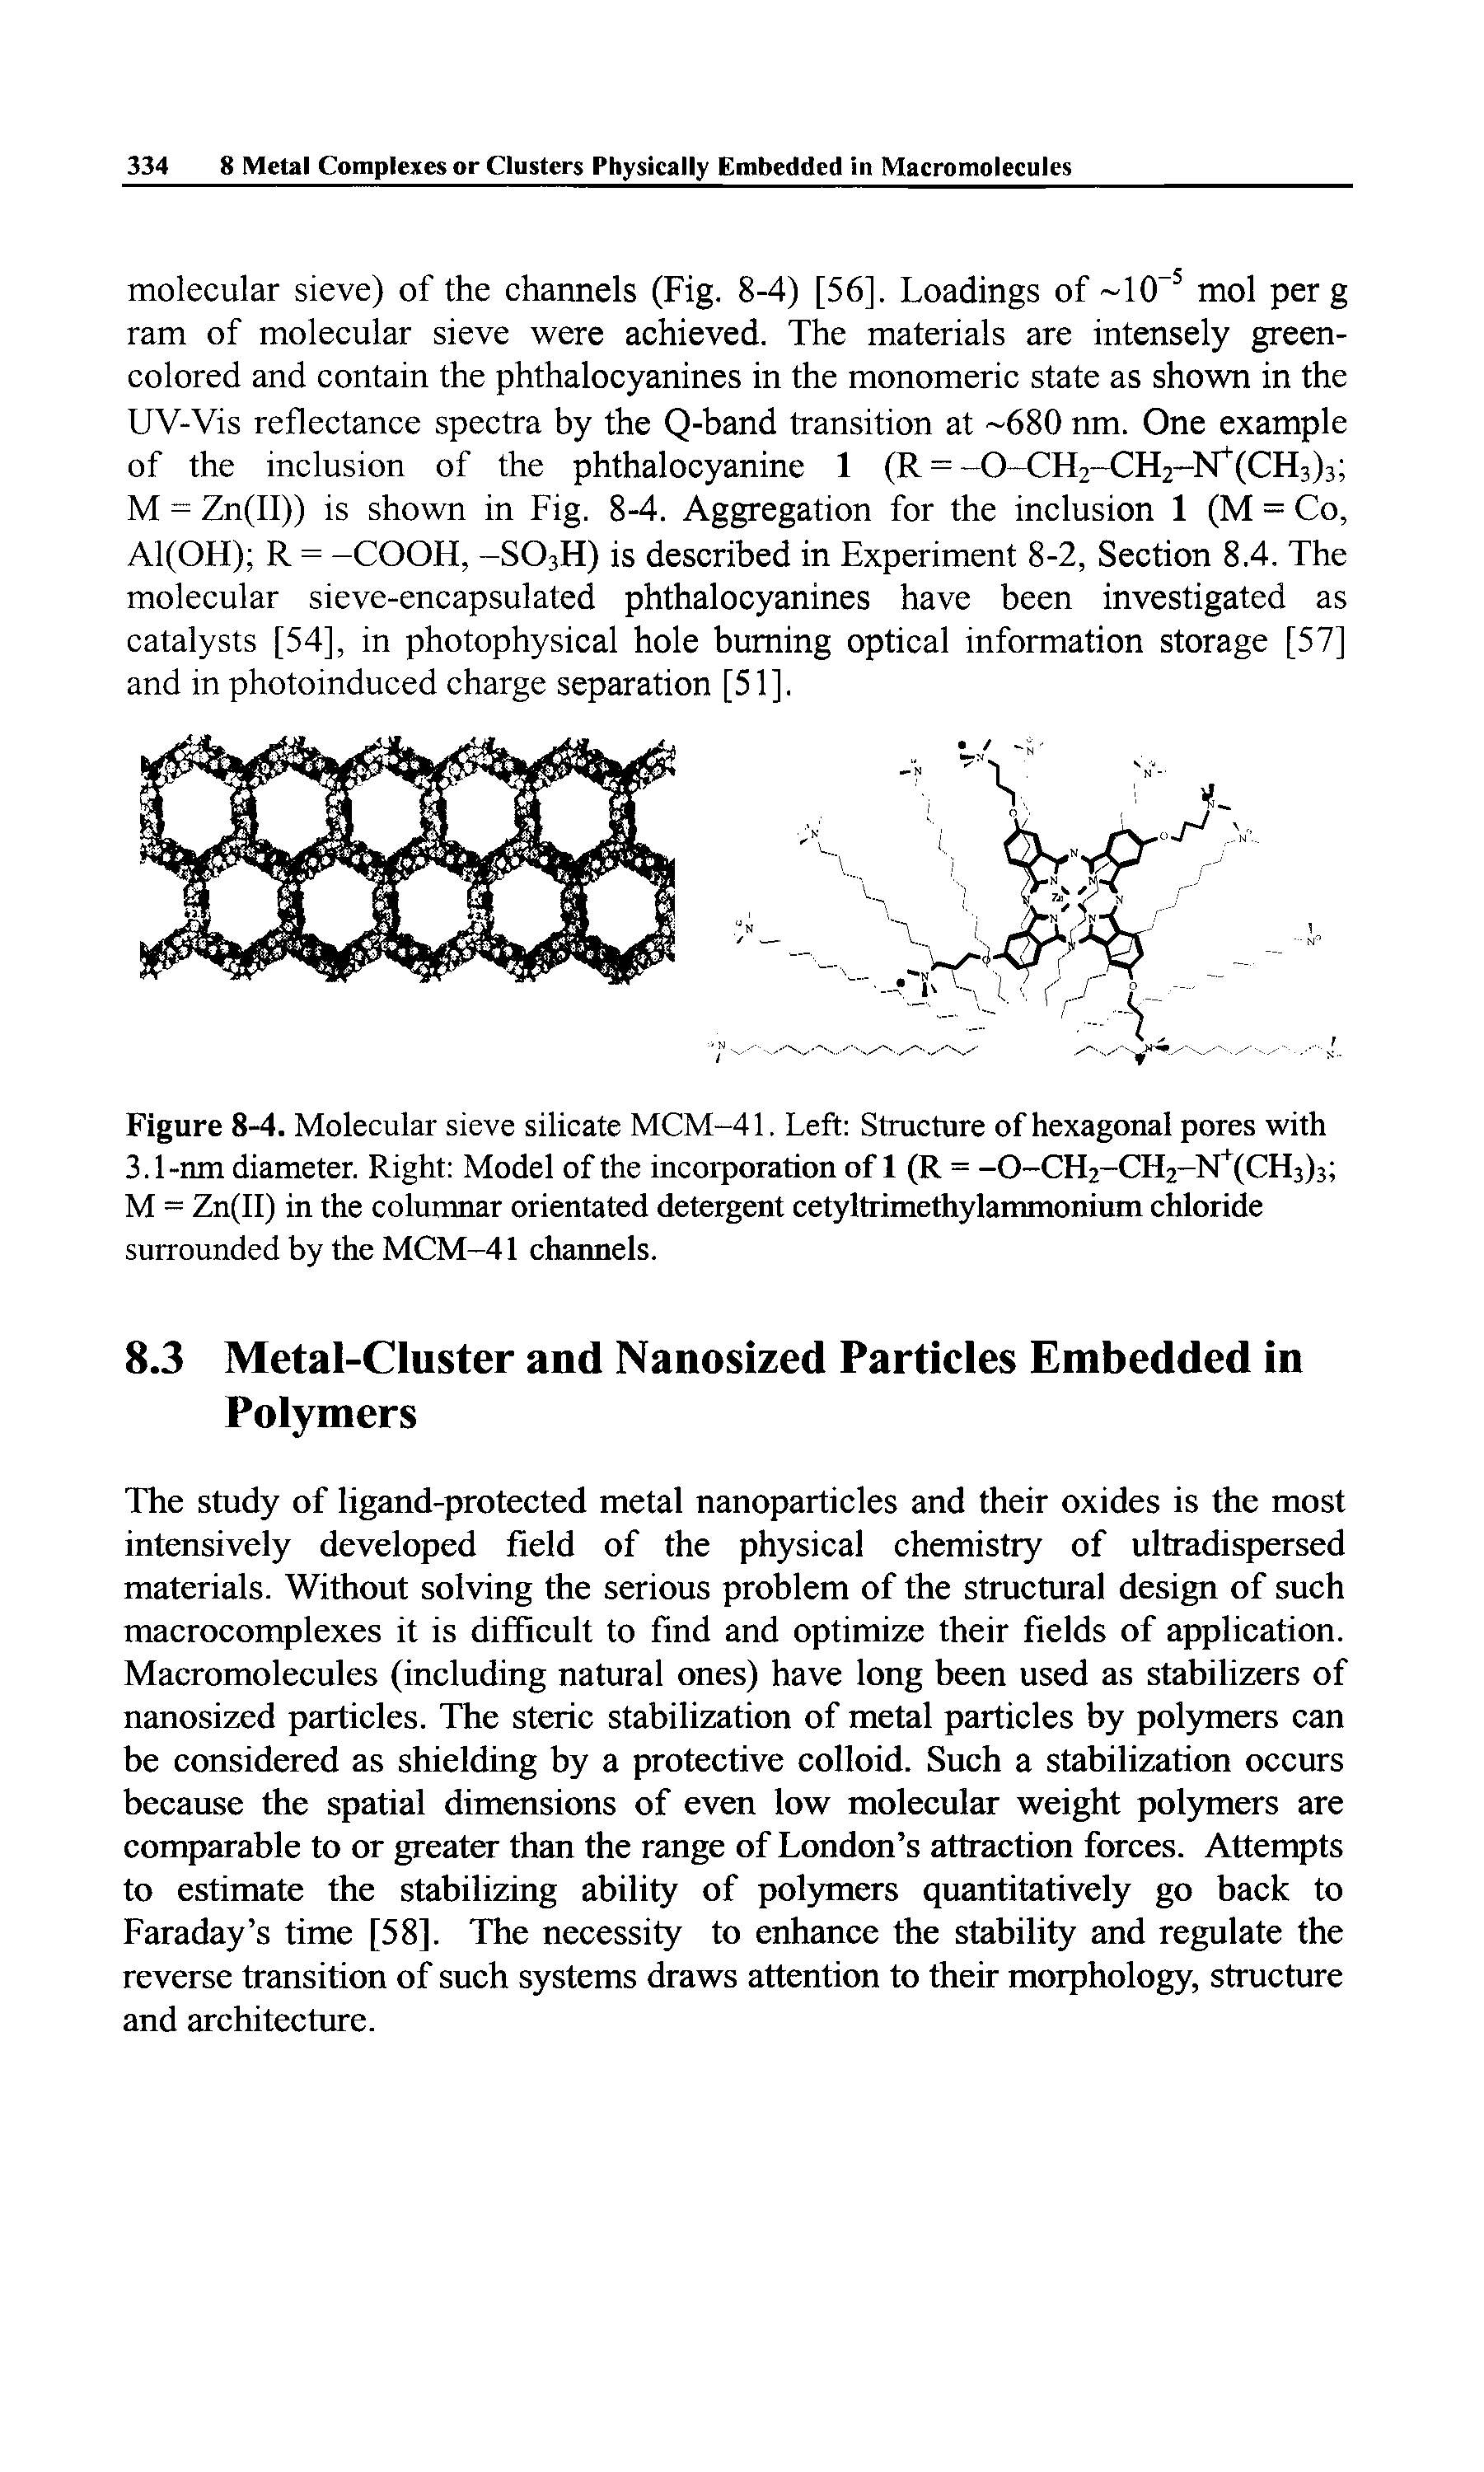 Figure 8-4. Molecular sieve silicate MCM-41. Left Structure of hexagonal pores with 3.1-nm diameter. Right Model of the incorporation of 1 (R = -0-CH2-CH2-N (013)3 M = Zn(II) in the columnar orientated detergent cetyltrimethylammonium chloride surrounded by the MCM-41 chaimels.